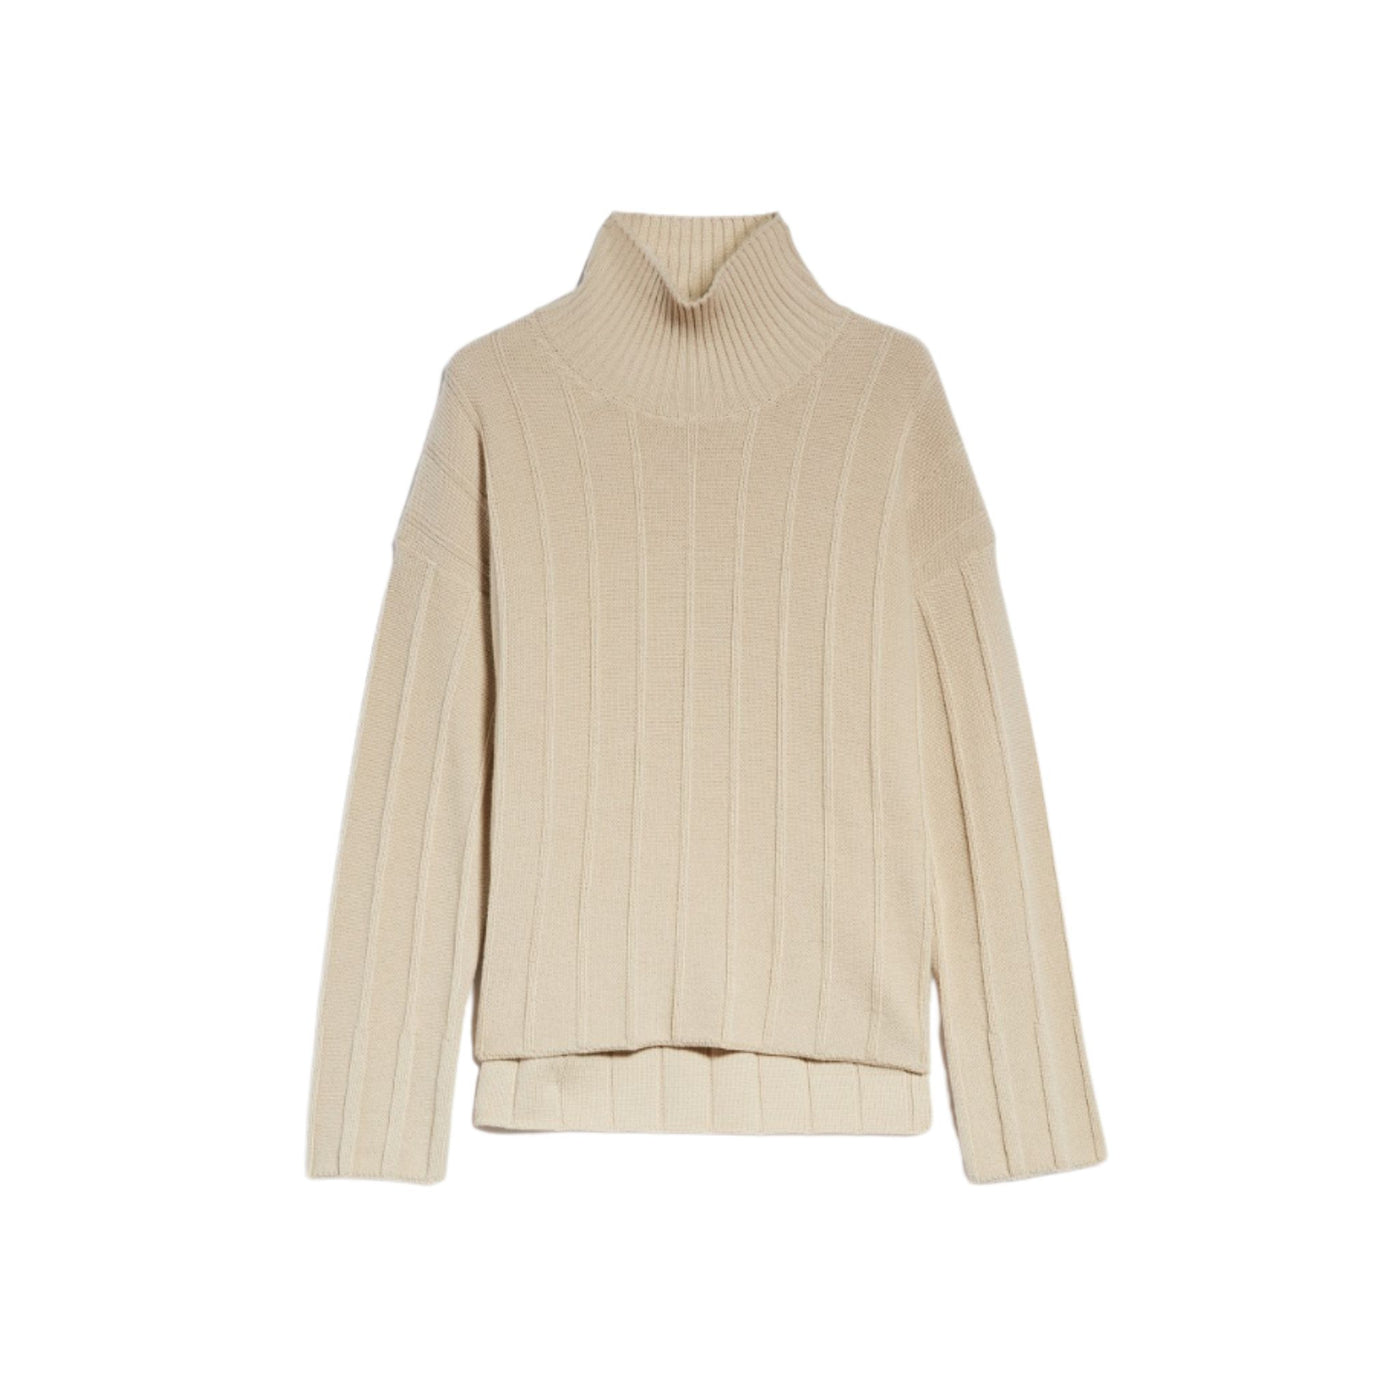 Women's sweater with ribbed high collar